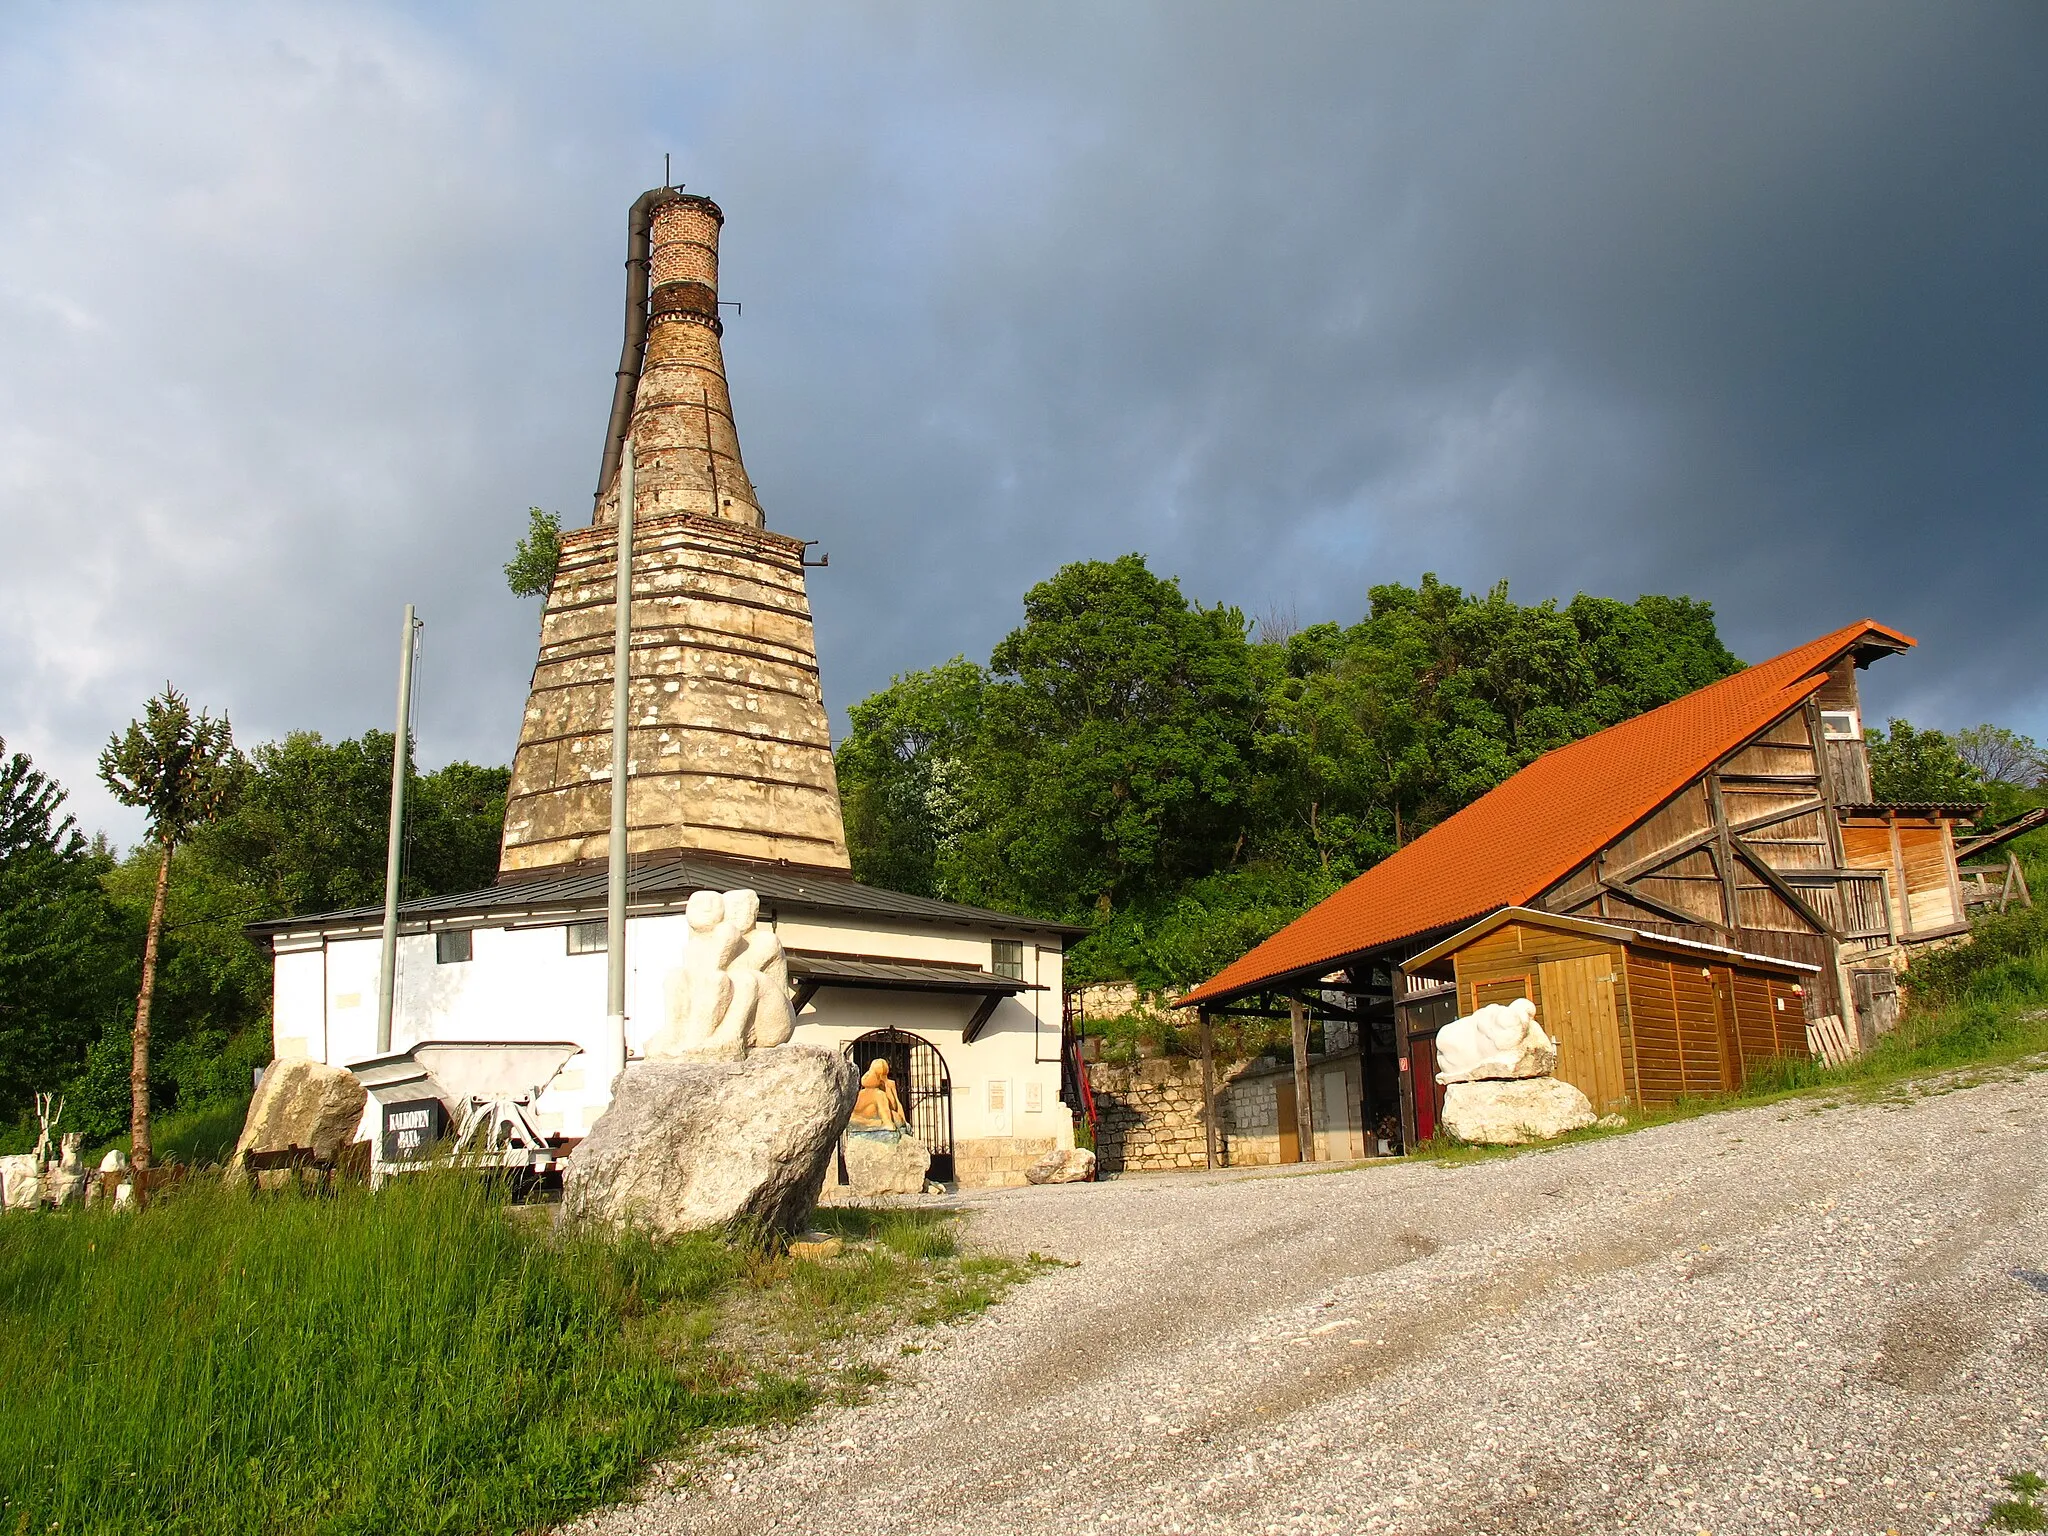 Photo showing: Kiln Baxa for burning limestone, built in 1893 near the village Mannersdorf am Leithagebirge / Lower Austria / Austria / EU. The furnace was renovated in 1996-1998, with the support of familie Hasslinger, the municipality Mannersdorf am Leithagebierge and active help of many volunteers. Around the building several stone sculptures are on display.